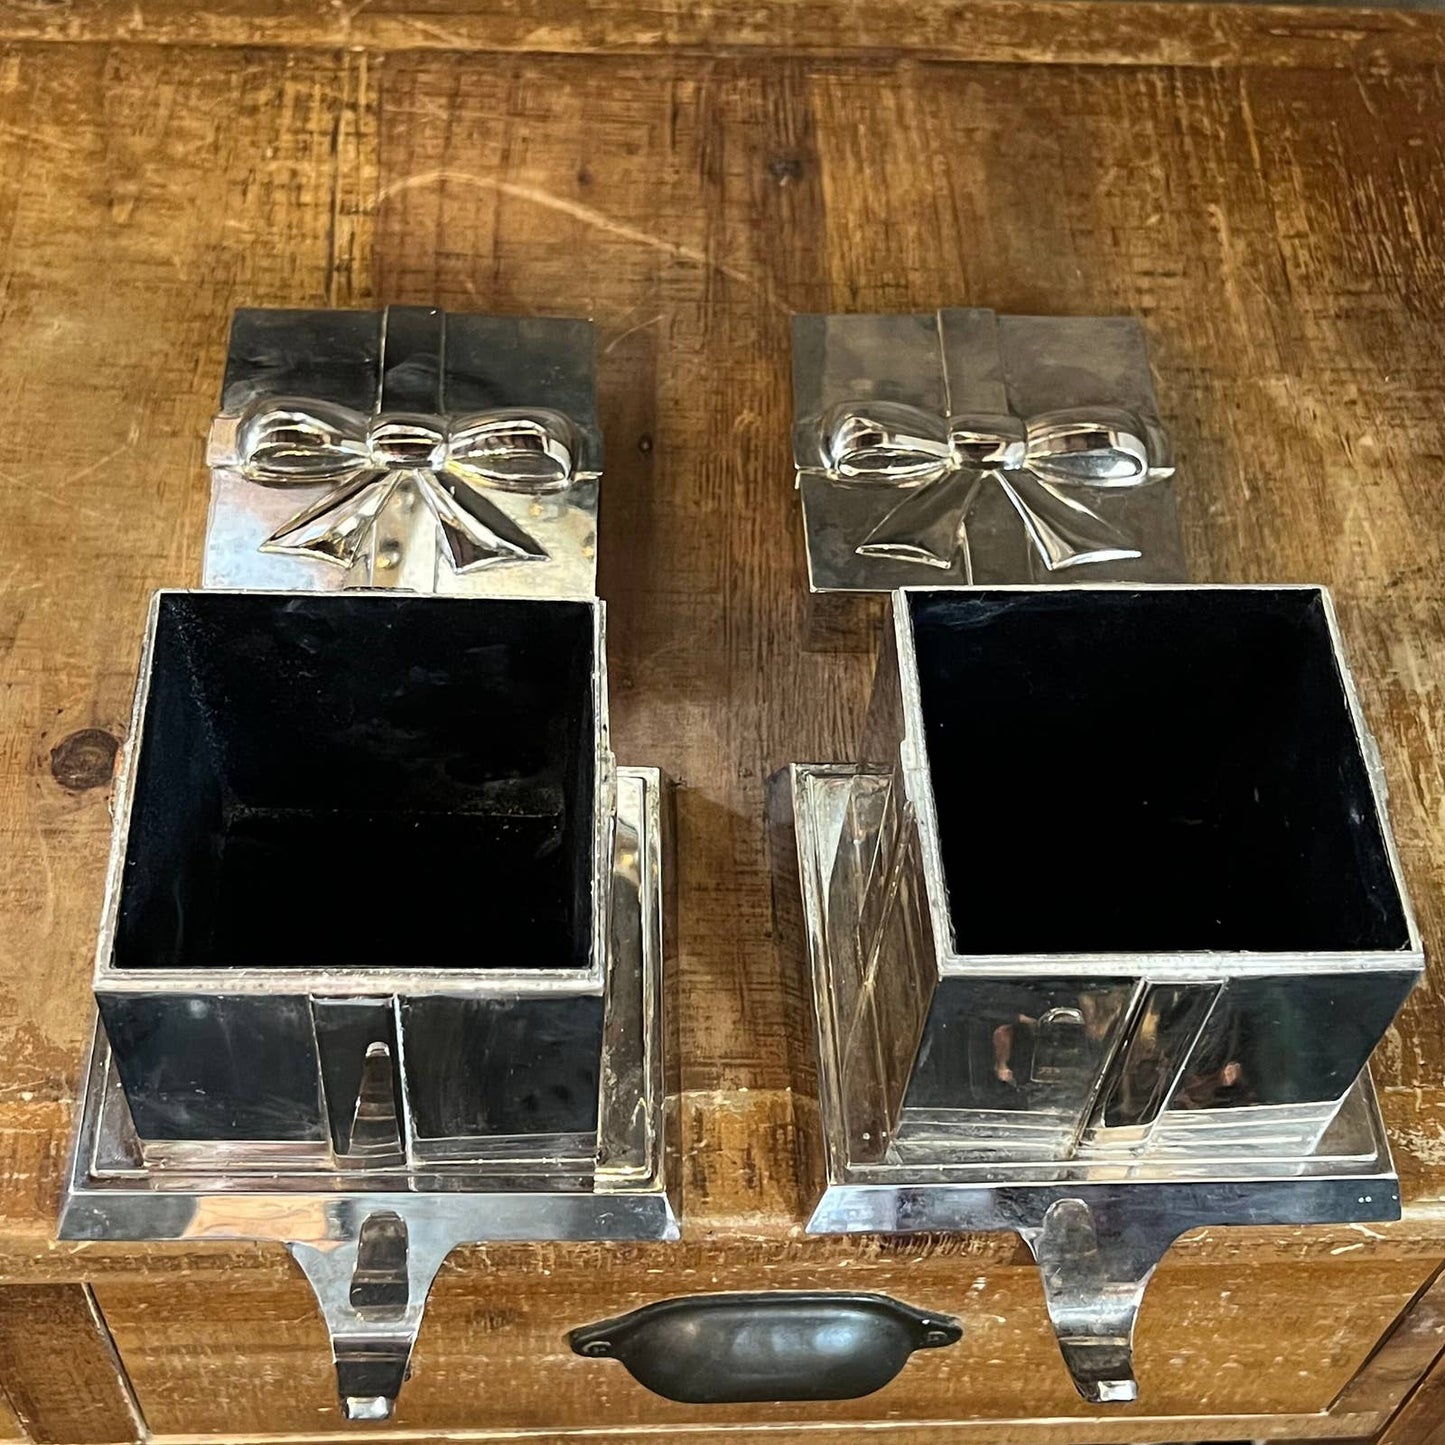 2 Pottery Barn silver wrapped gift stocking holders with hidden compartment